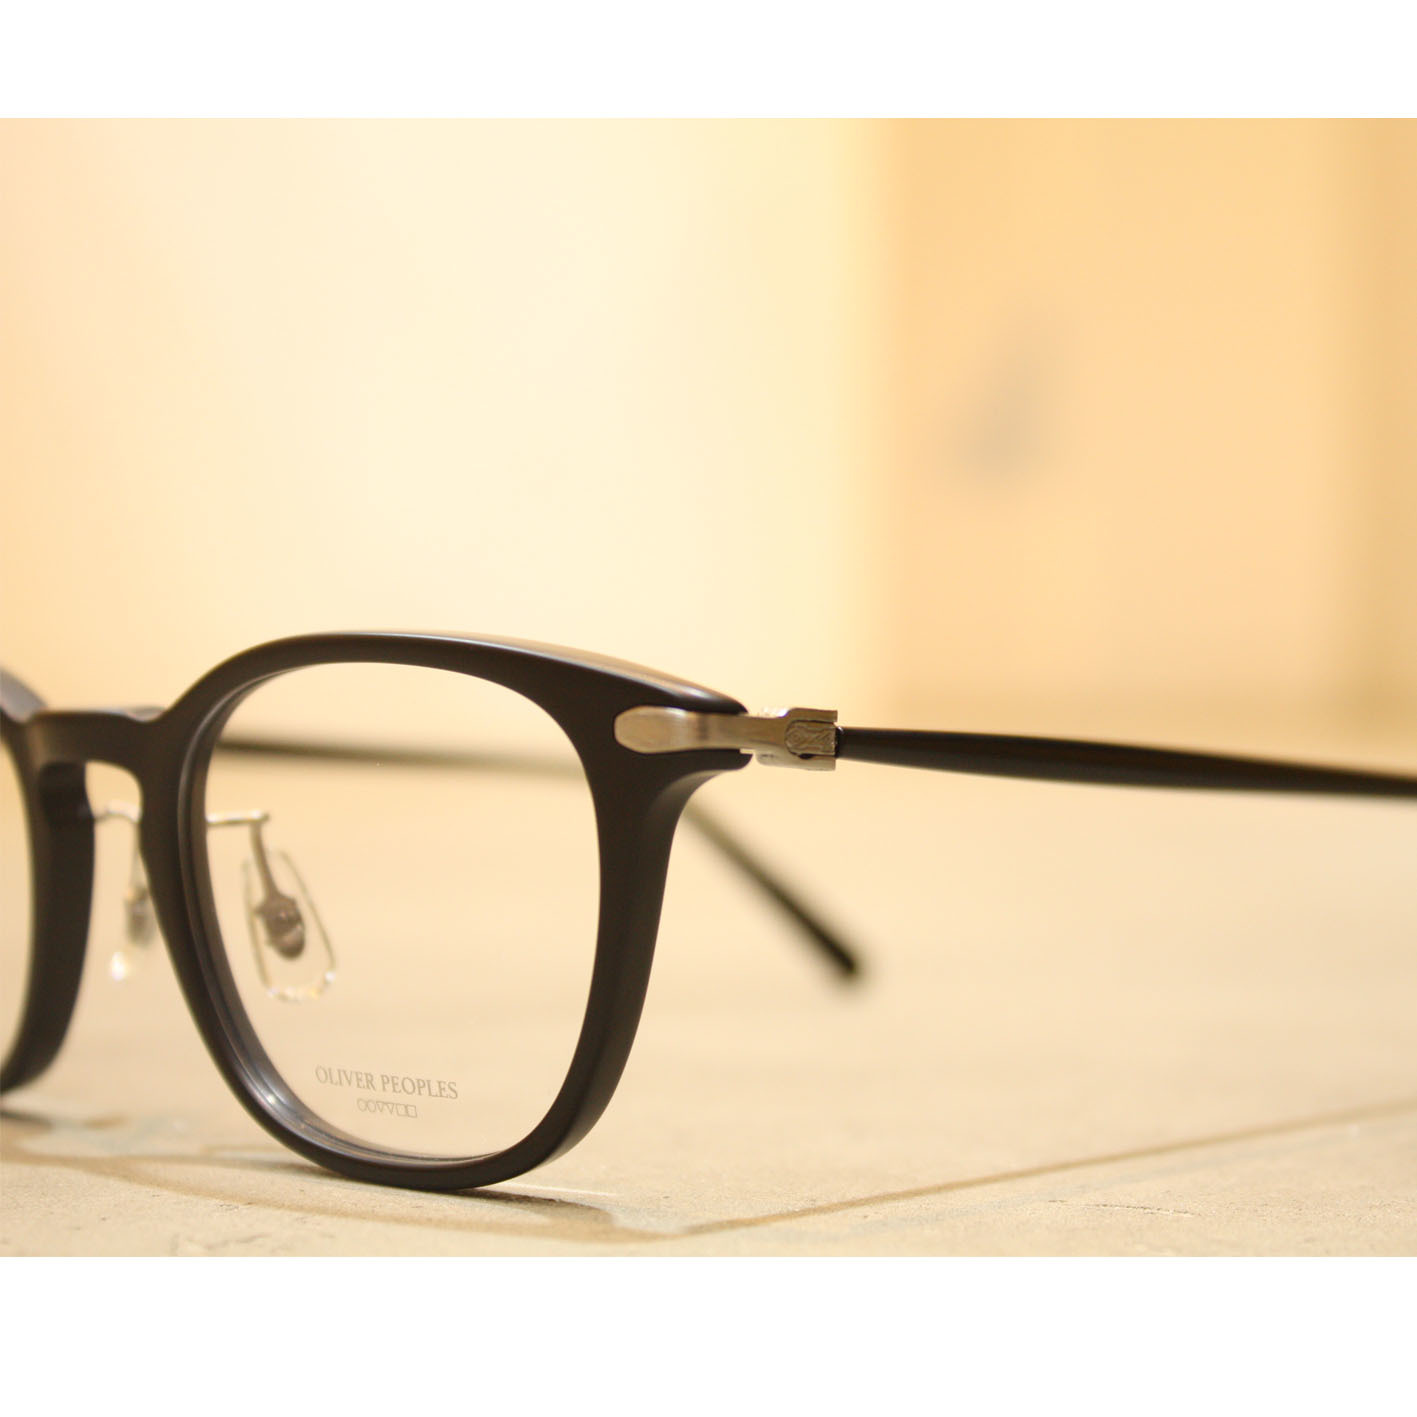 OLIVER PEOPLES 2016 NEW ARRIVAL_f0208675_22053416.jpg